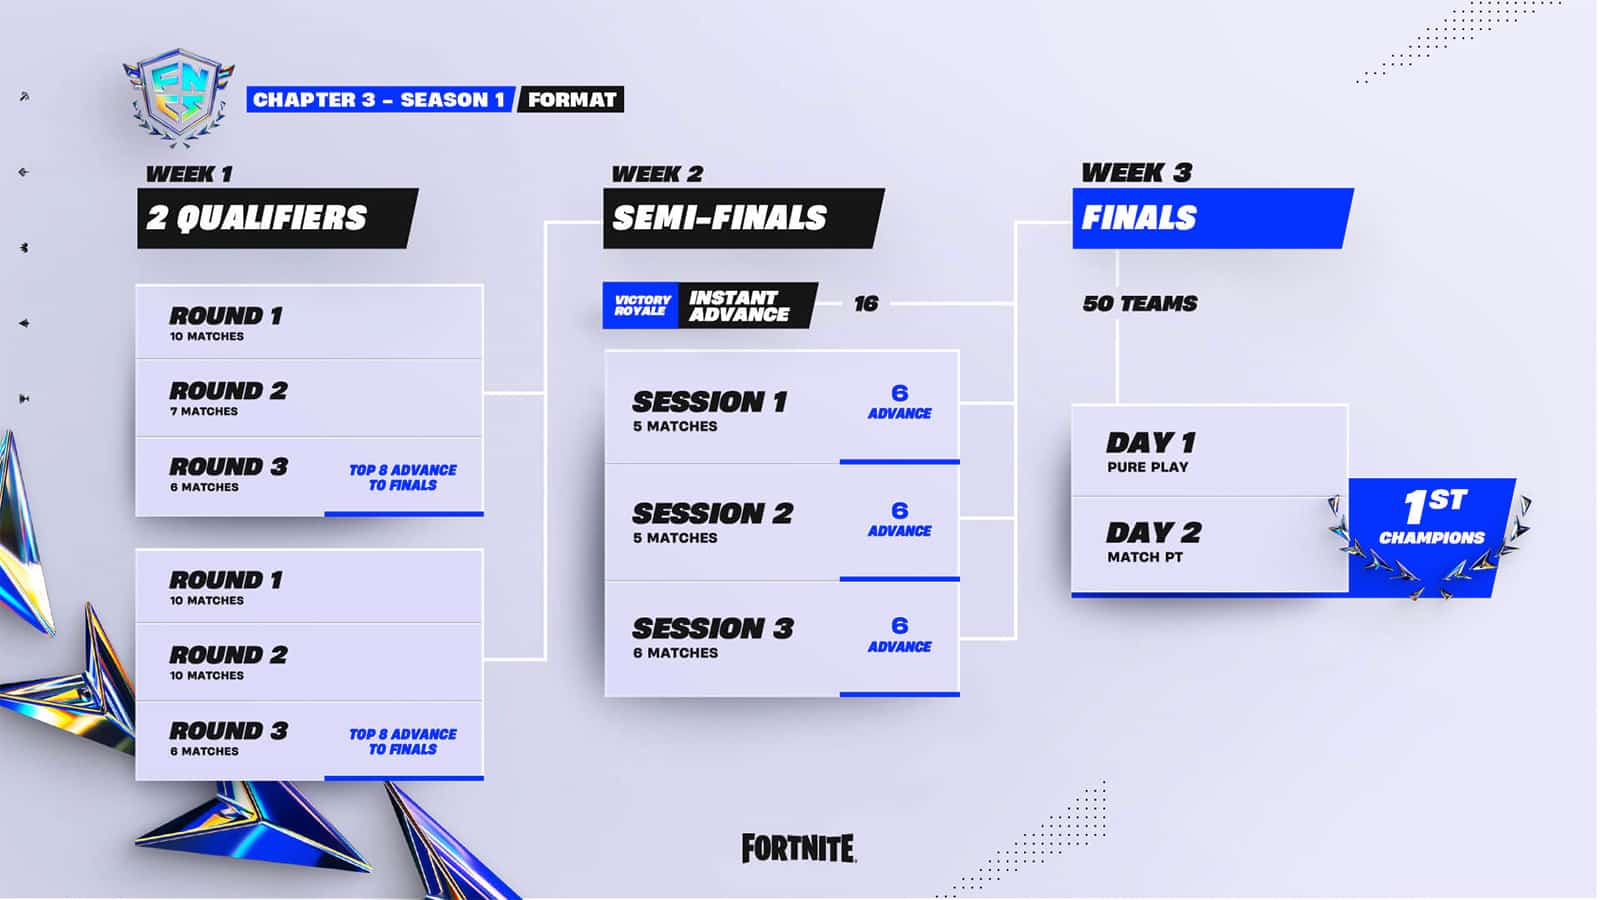 The schedule for Fortnite Chapter 3 Season 1 FNCS